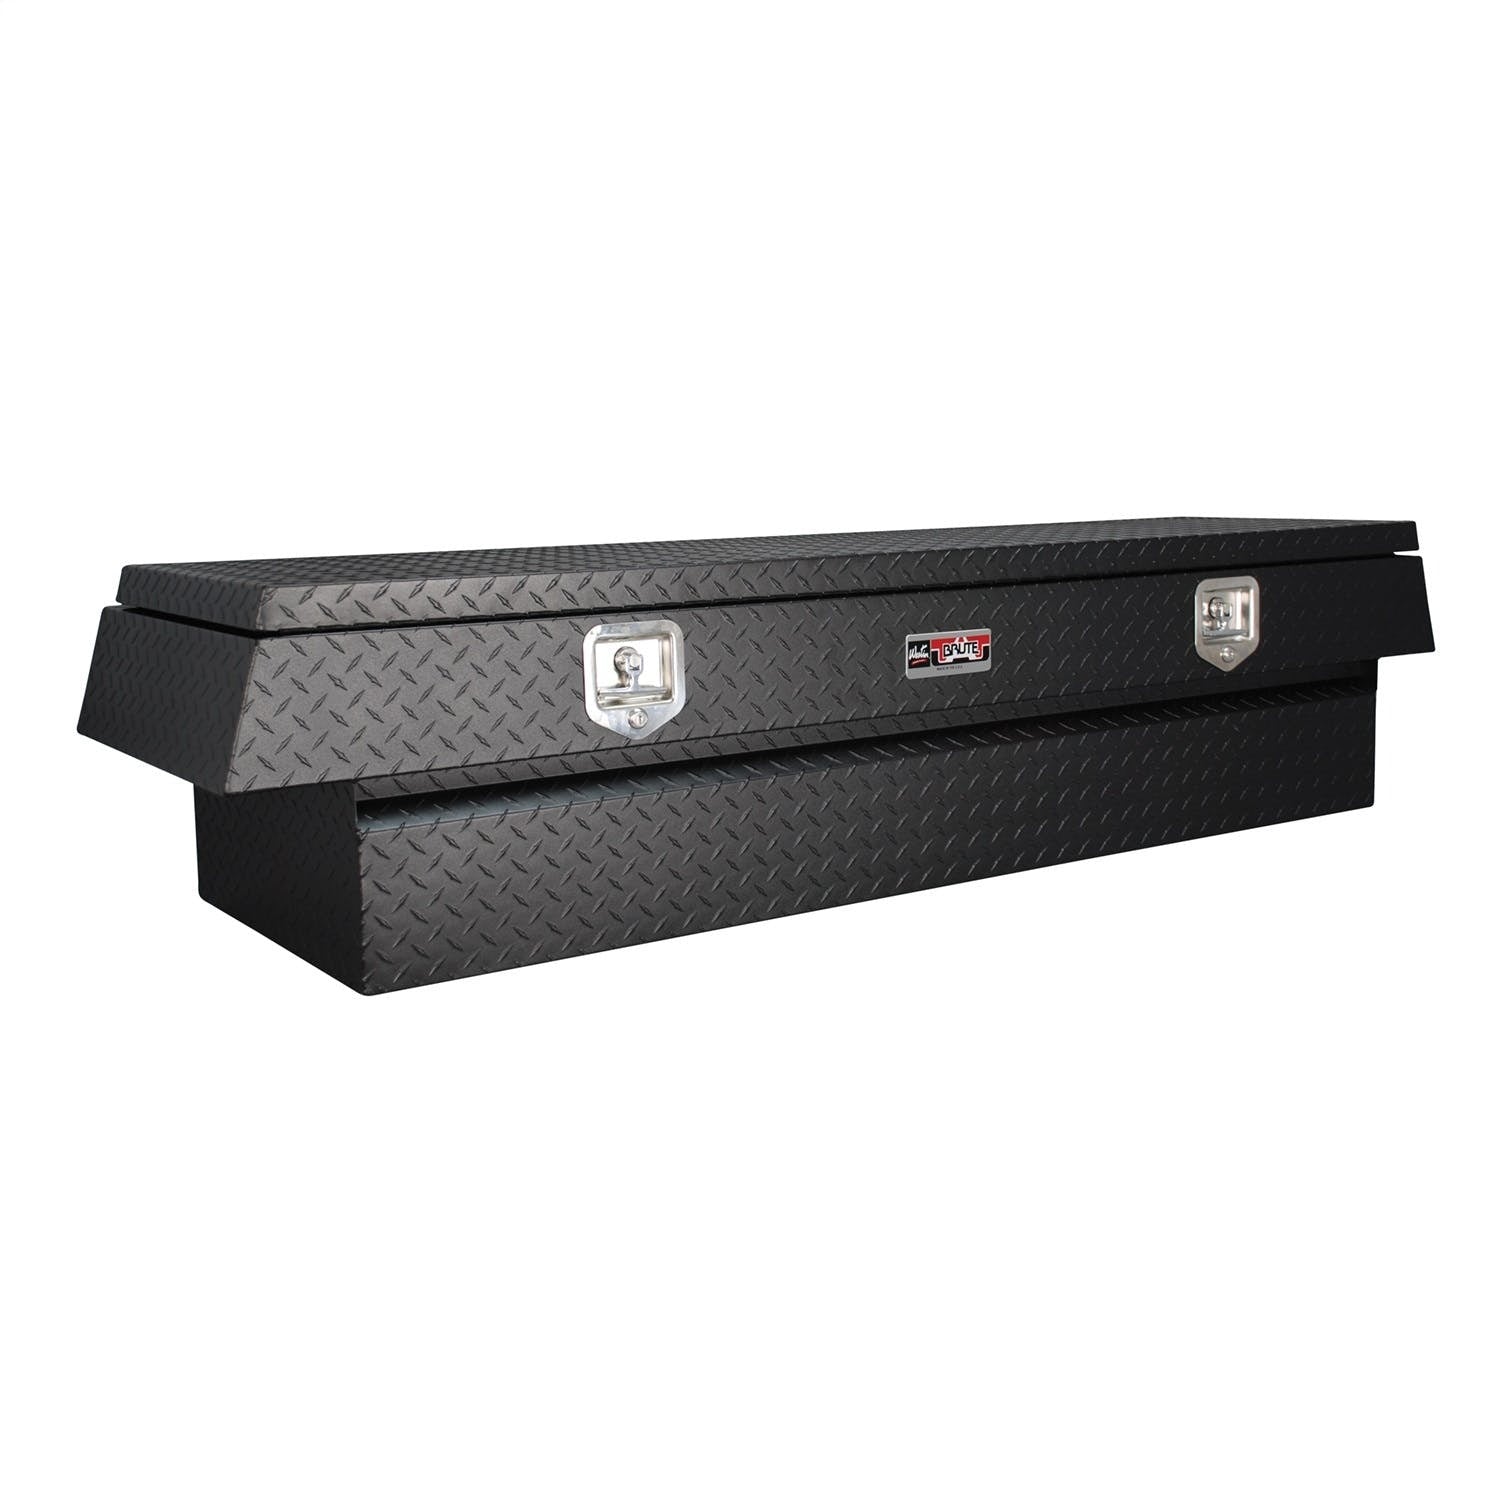 Westin Automotive 80-RB121LP-BT Low Profile Full Lid Full Size XOver Standard Overall Dims: 71x20x15.5